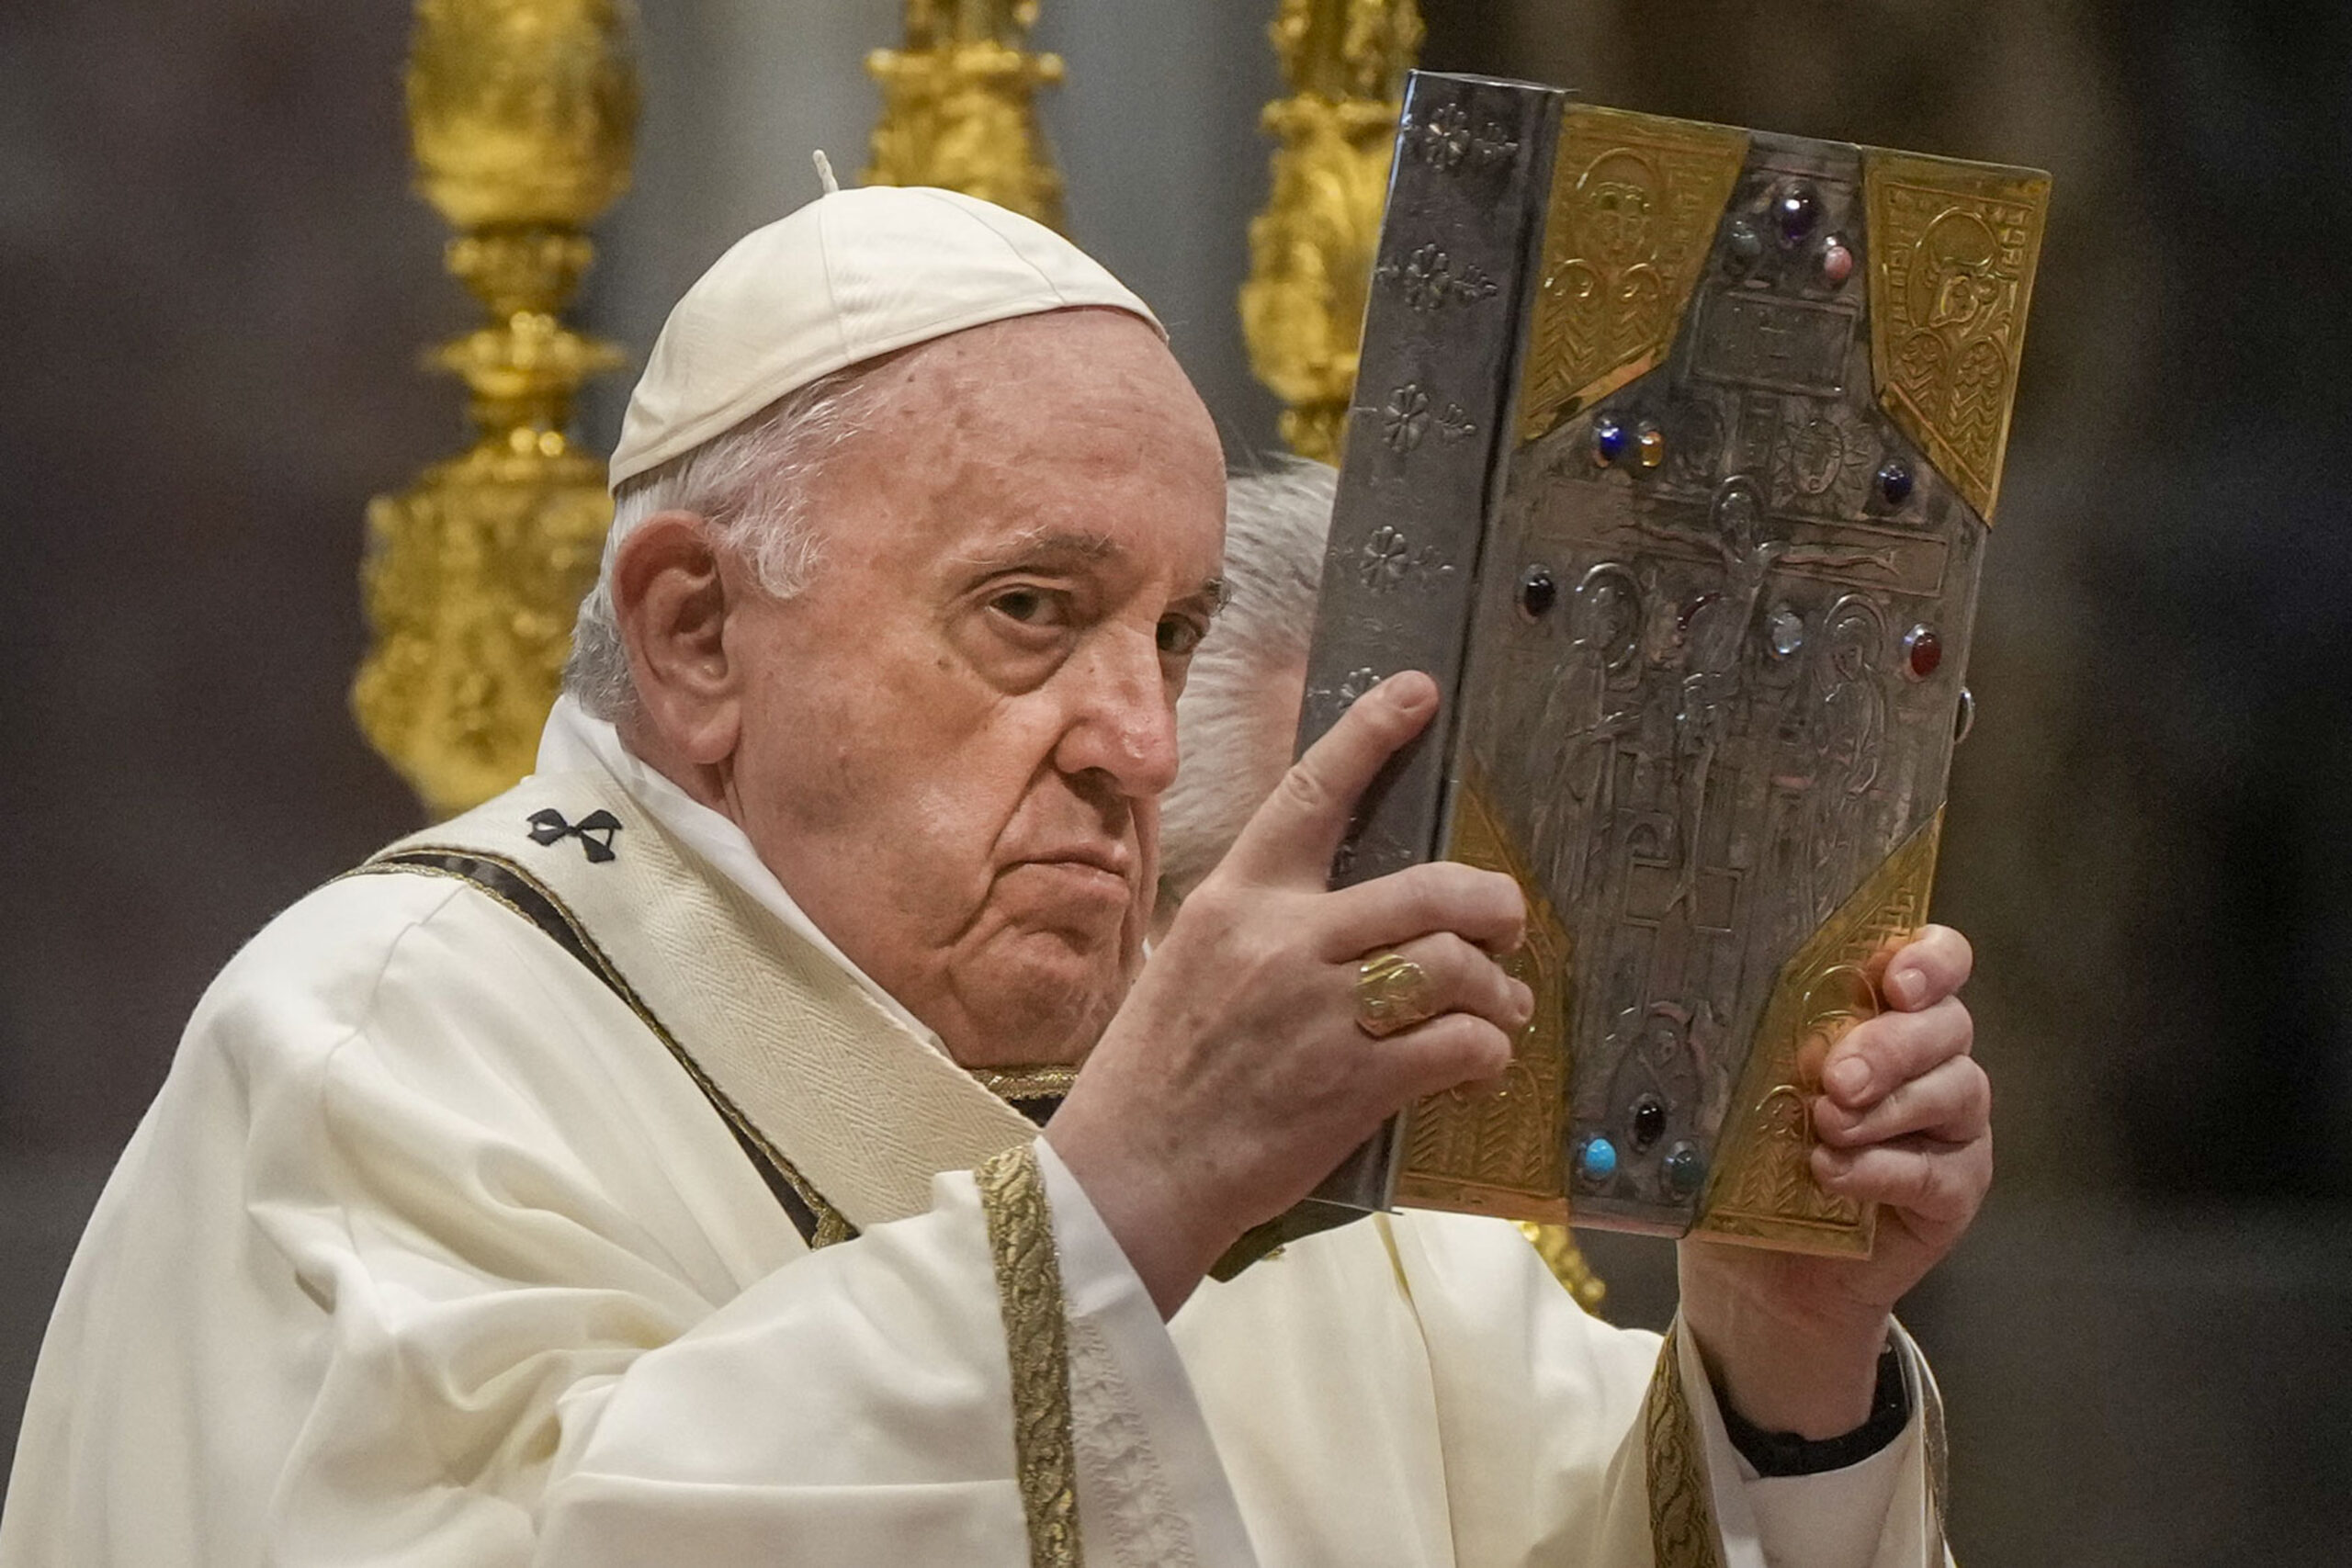 Pope Francis hoists the Gospel book during a Chrism Mass inside St. Peter's Basilica, at the Vatican, Thursday, April 14, 2022. During the mass the Pontiff blesses a token amount of oil that will be used to administer the sacraments for the year. (AP Photo/Gregorio Borgia)